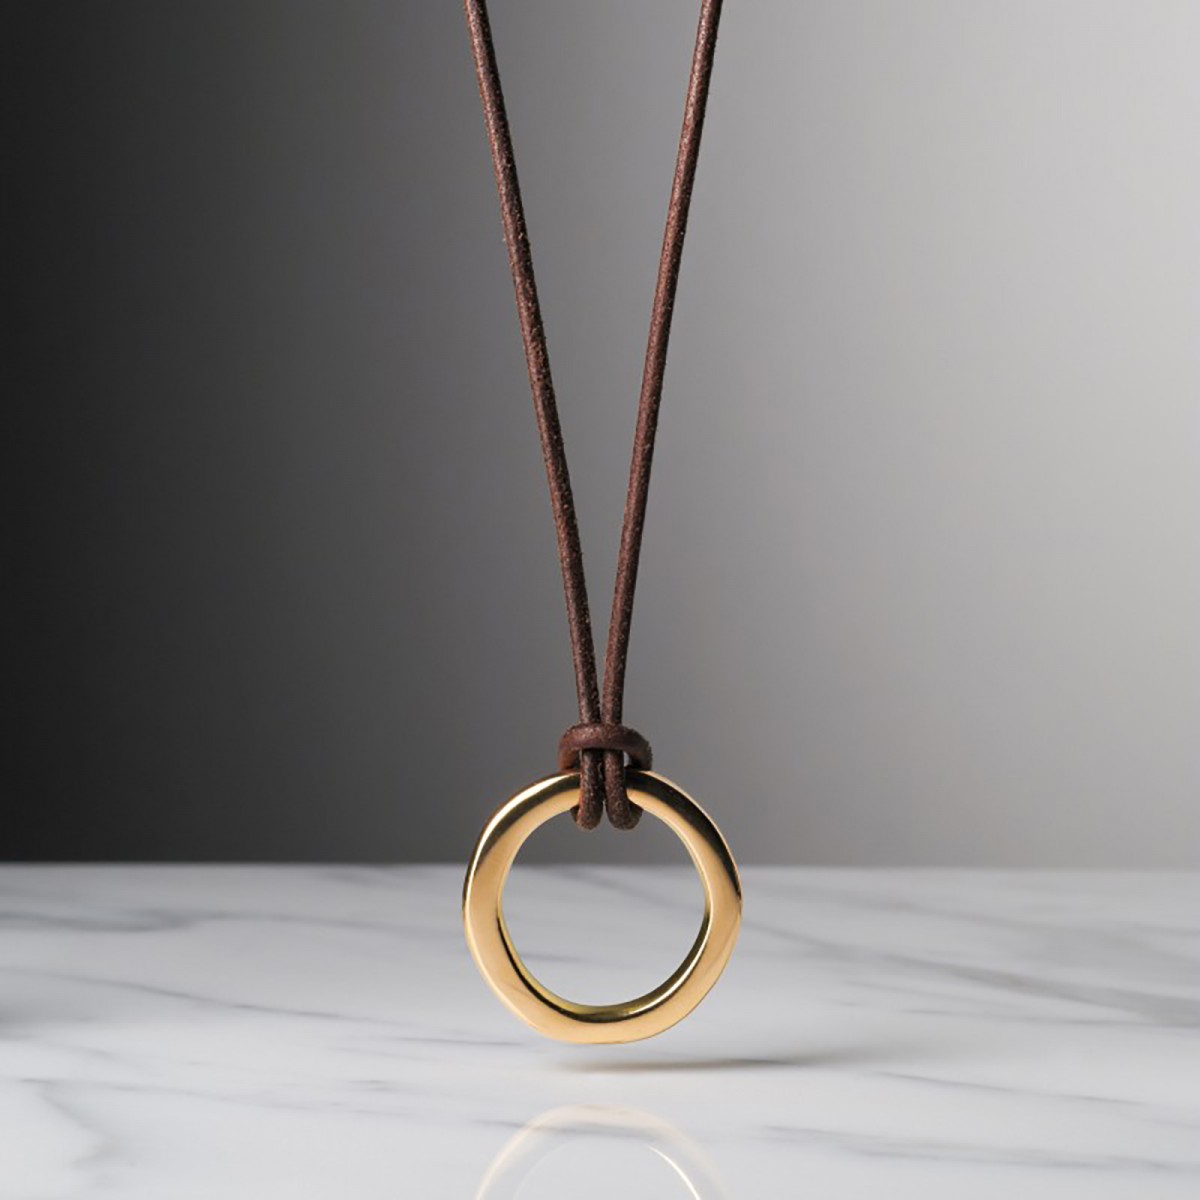 ACCROCHE-MOI 1958 GOLD - Necklace handcrafted by the Hervé Domar workshop